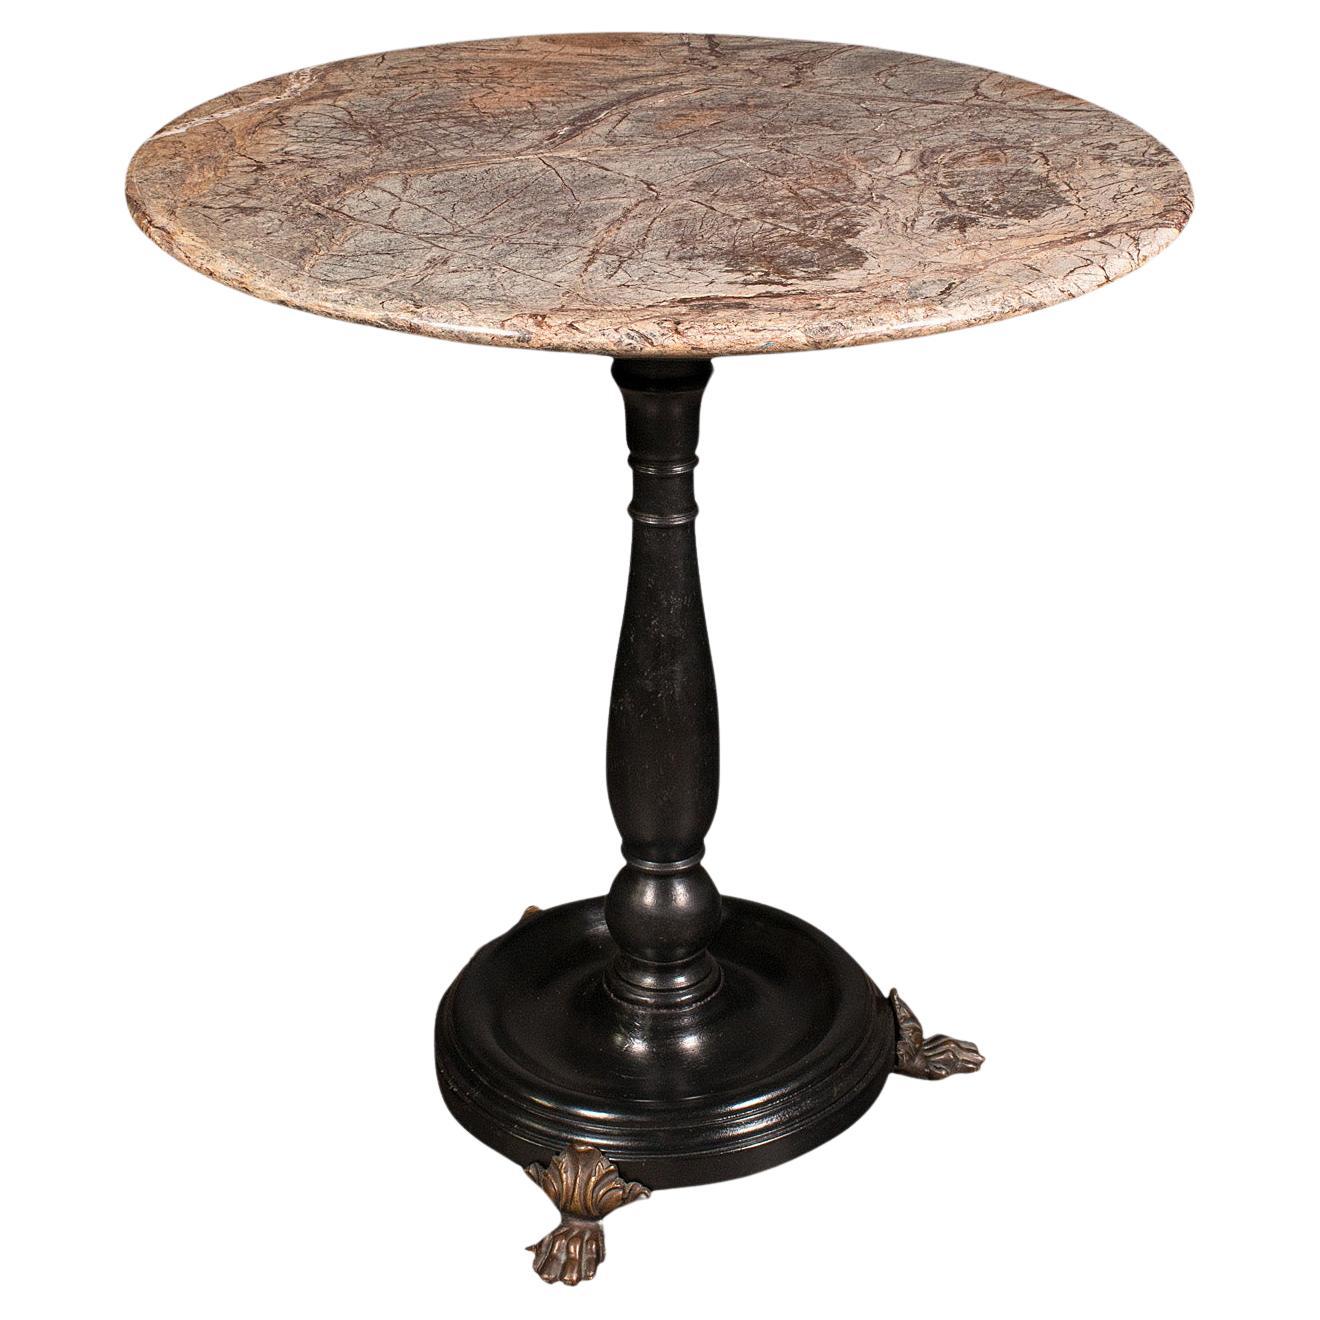 Antique Country House Lamp Table, English, Marble, Georgian Revival, Victorian For Sale